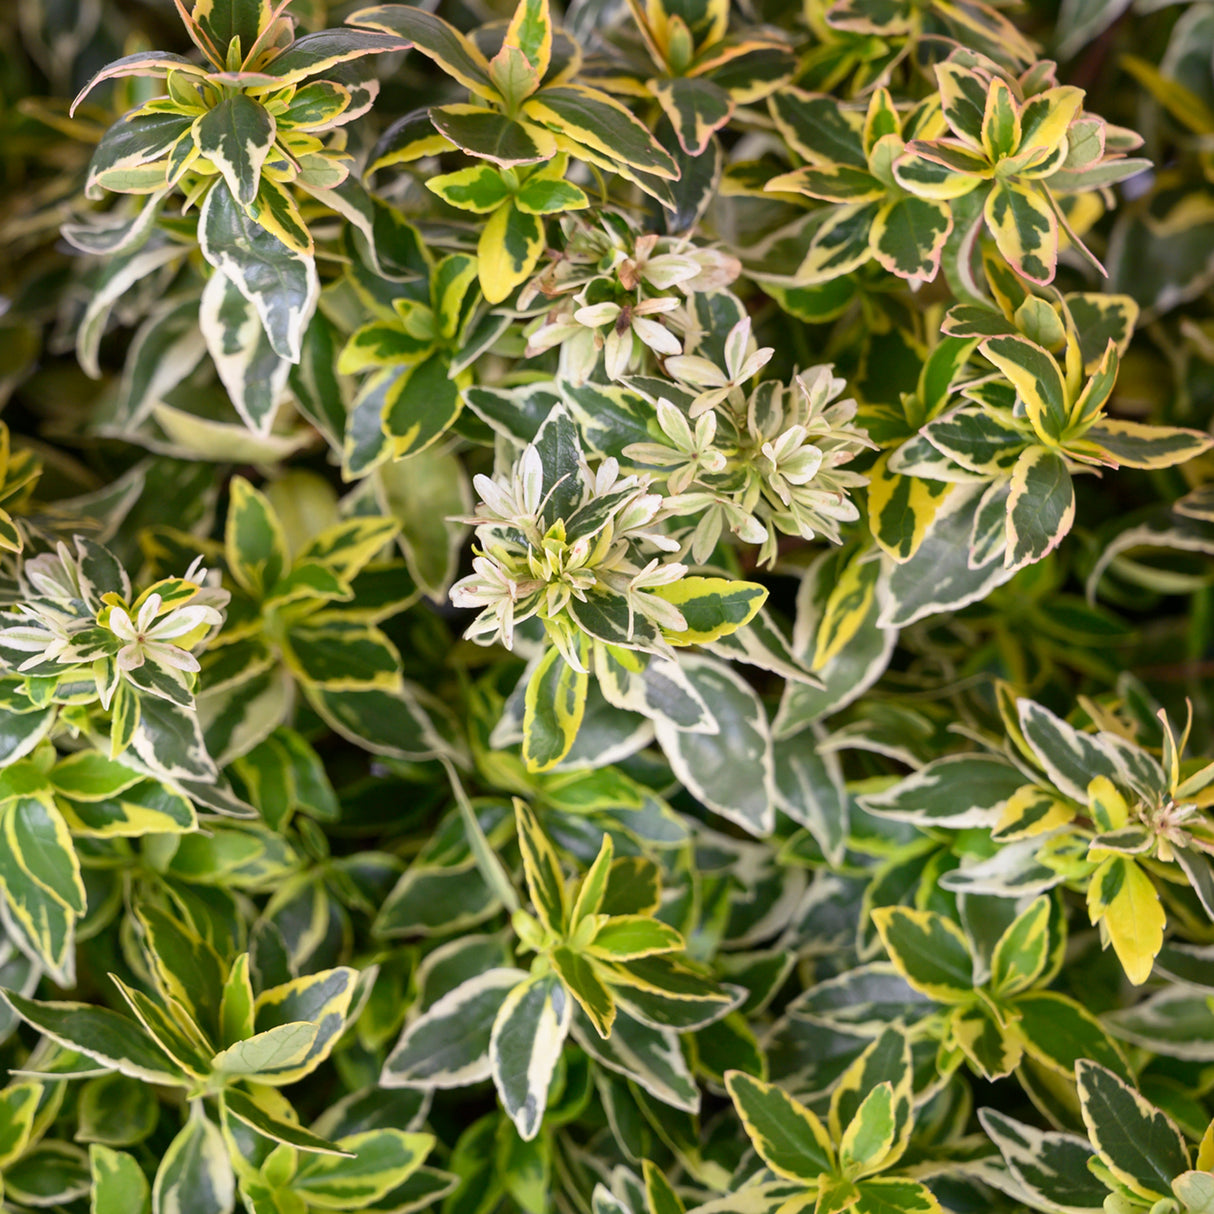 Small white flowers and variegated green and yellow foliage on the abelia suntastic radiance from Southern Living Plants